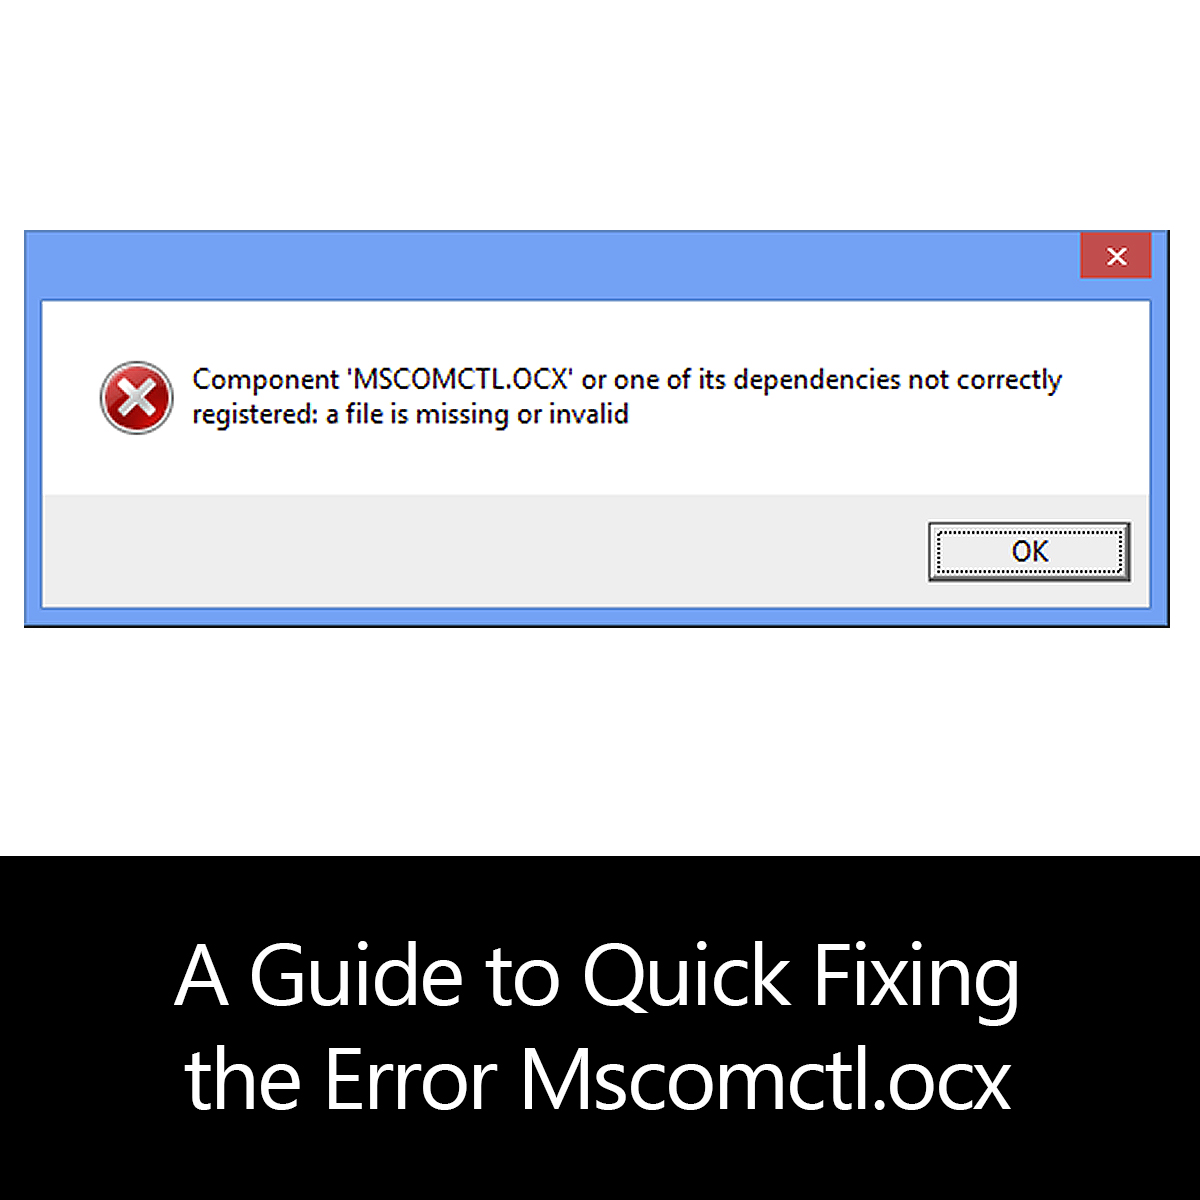 mscomctl ocx dependencies not correctly registered